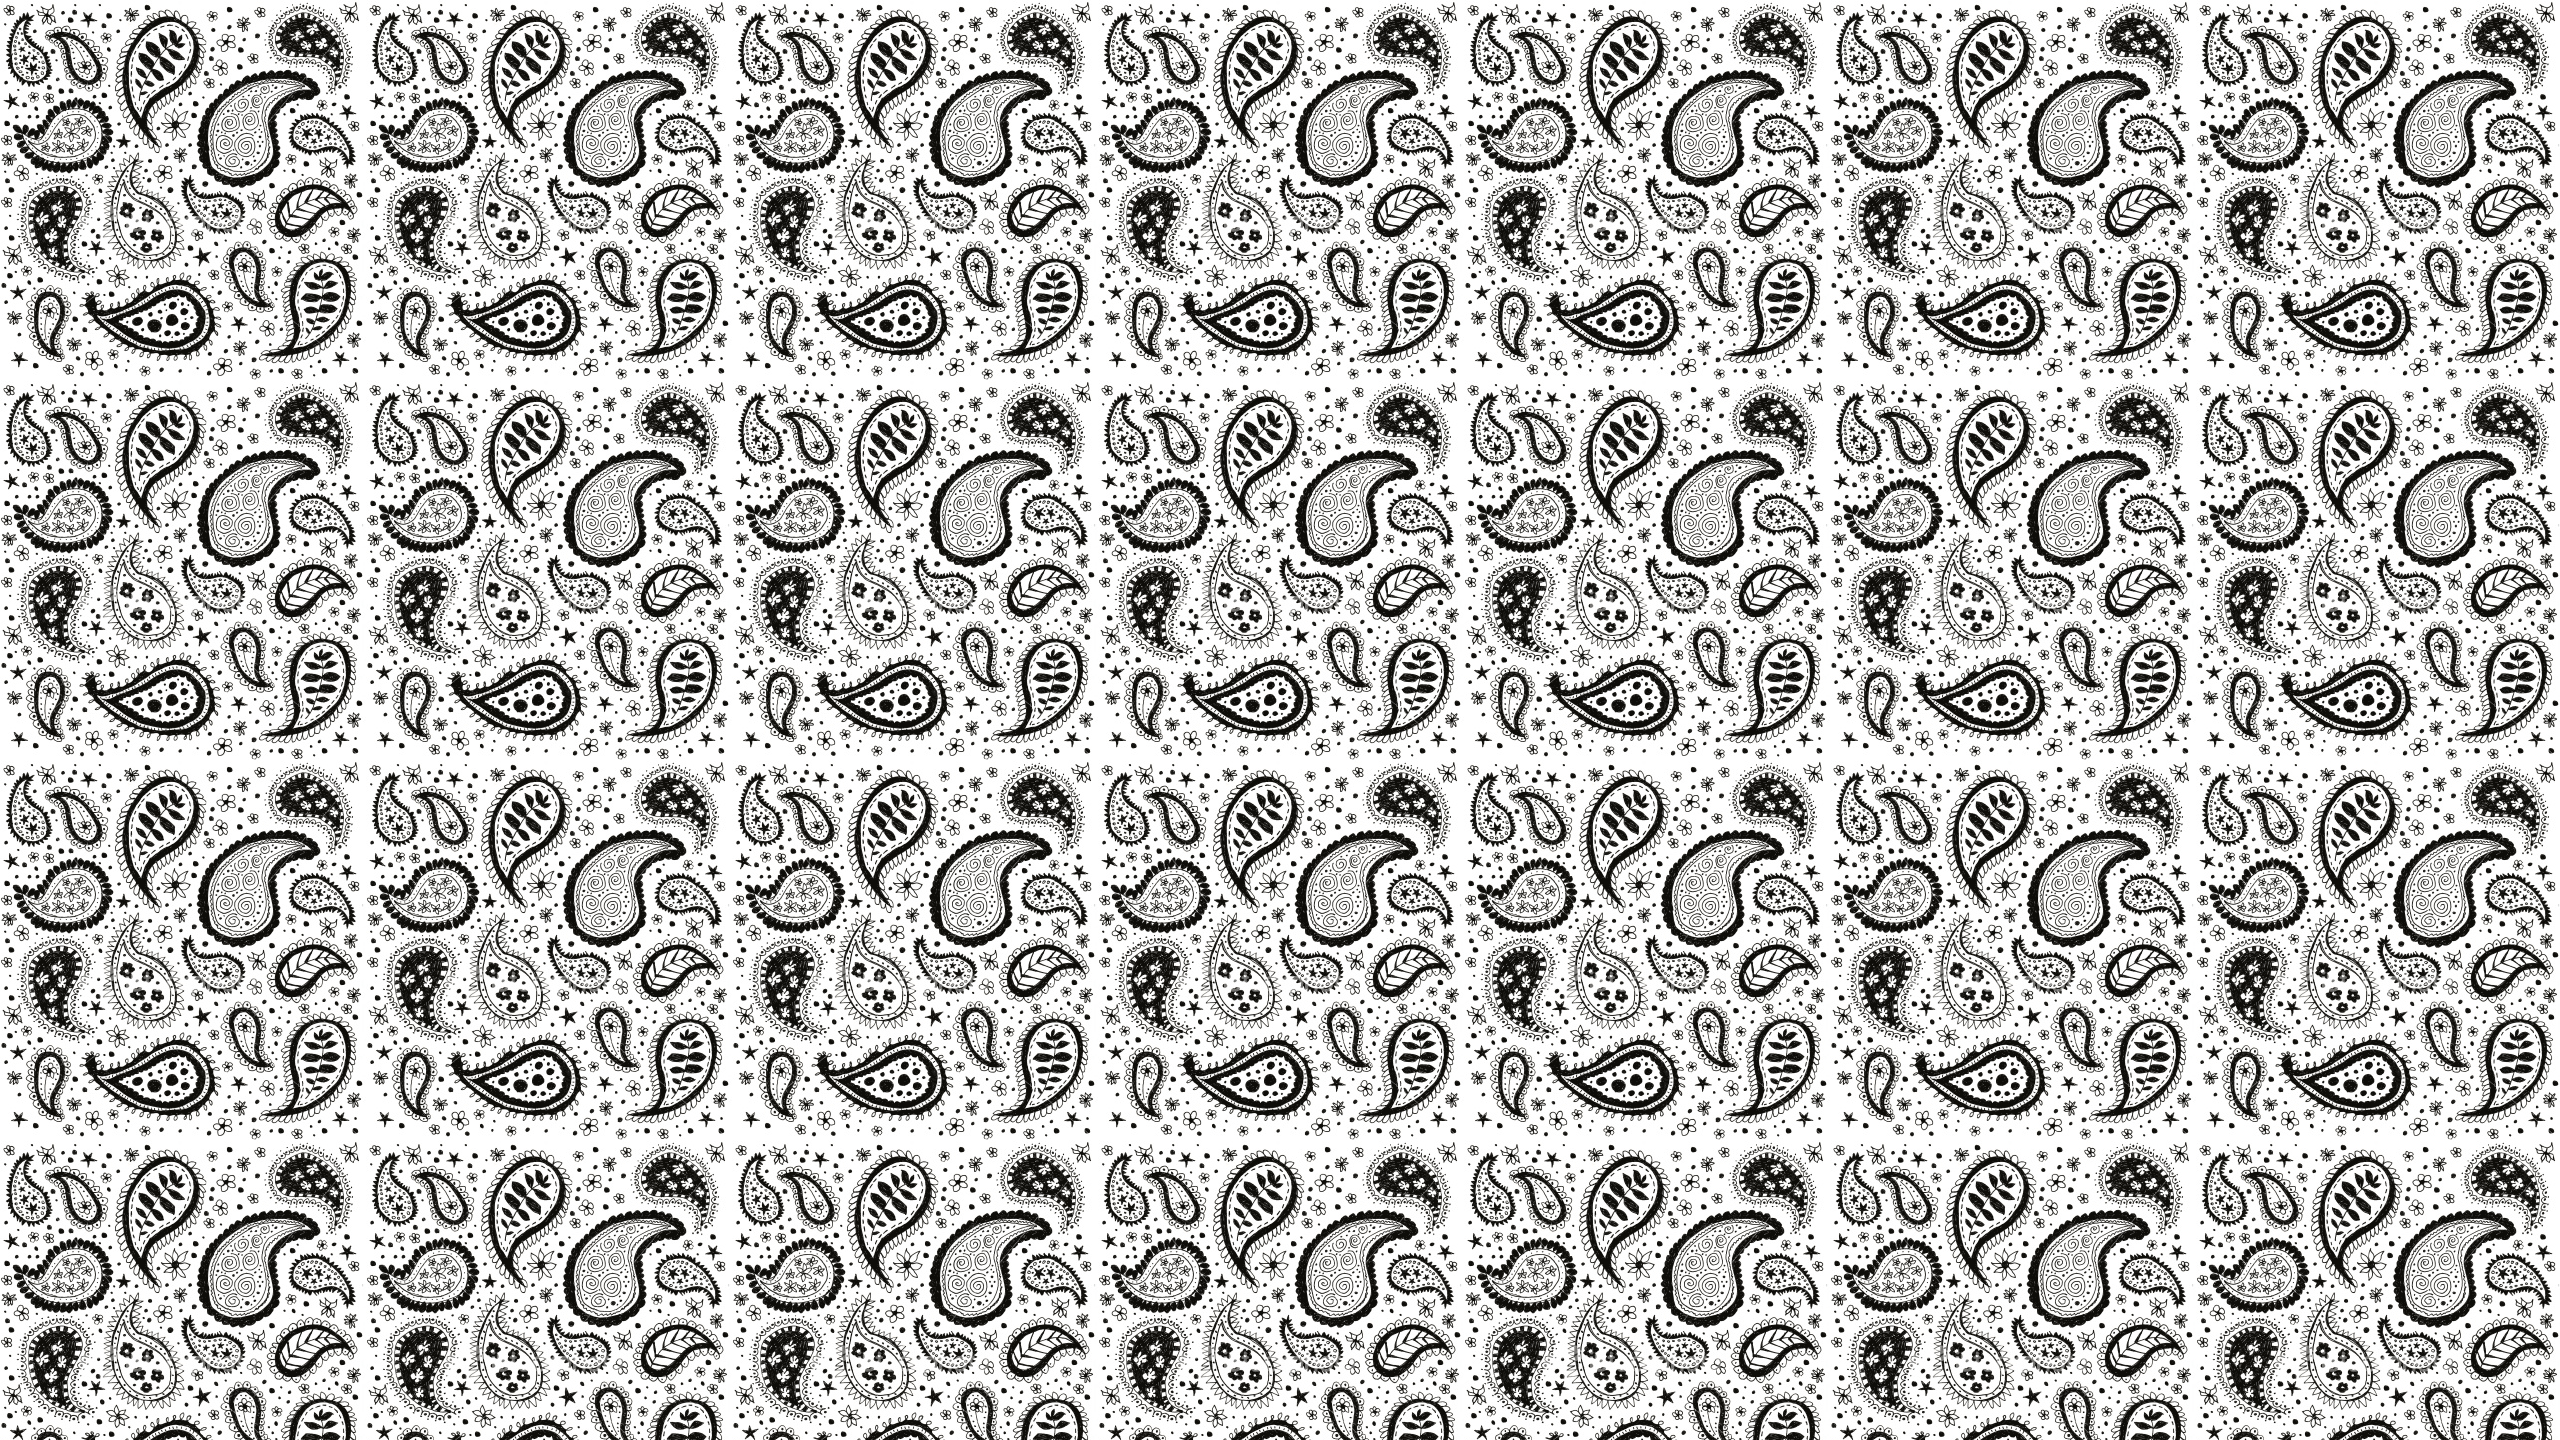 White Black Paisley Desktop Wallpaper Is Easy Just Save The